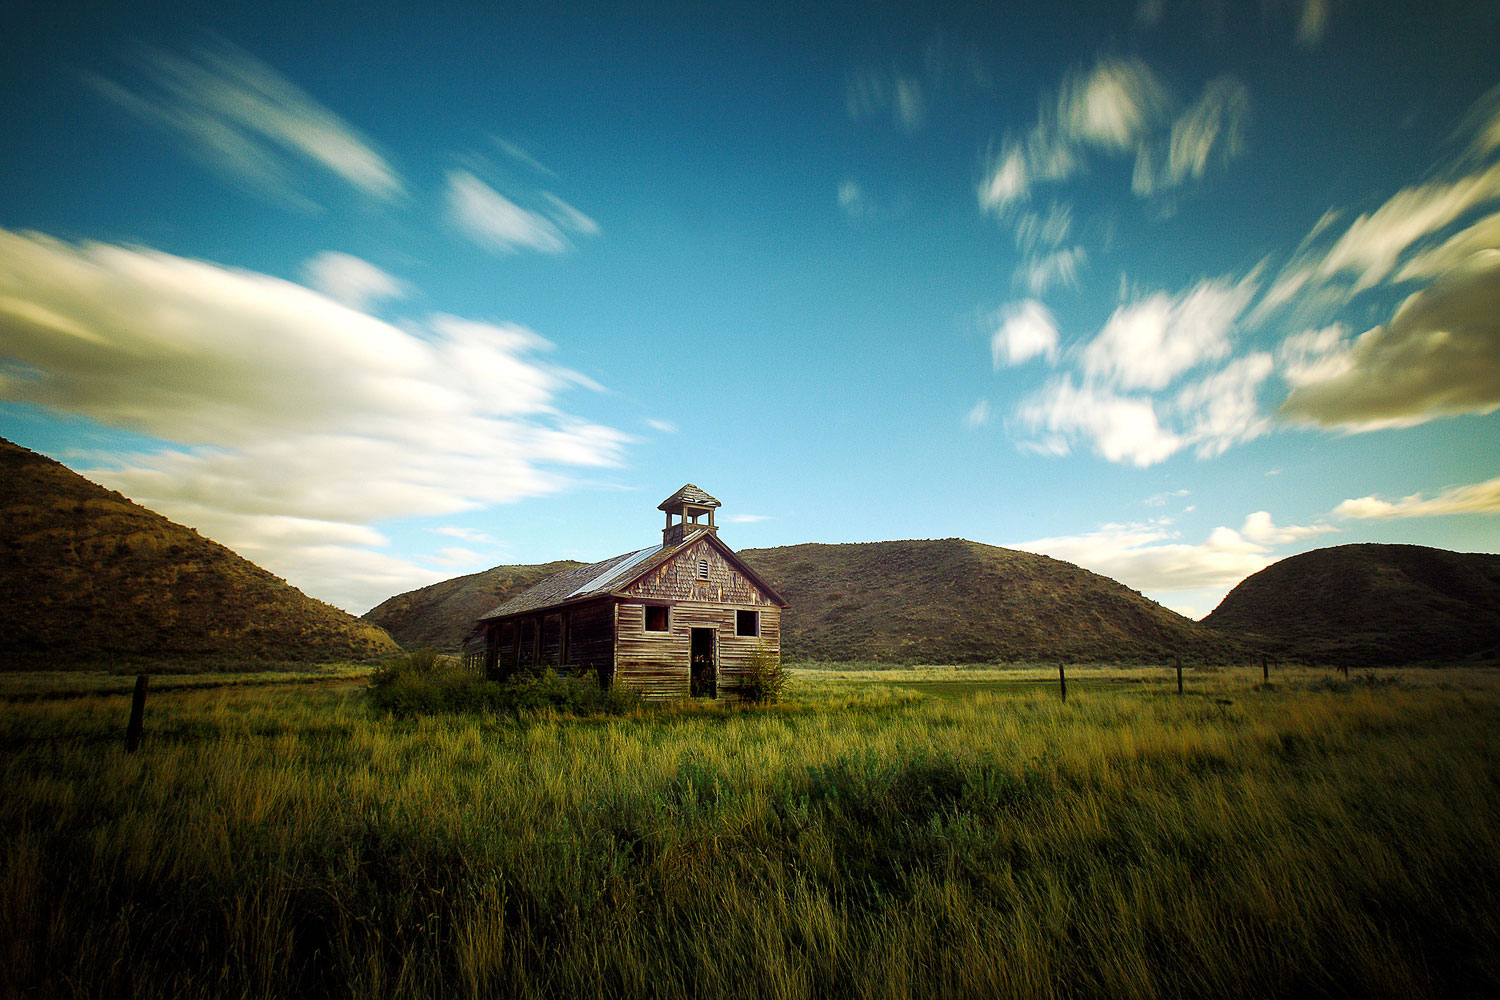 An old, weathered schoolhouse or church tucked between the hills outside of Loma, Montana.&nbsp;→ Buy a Print